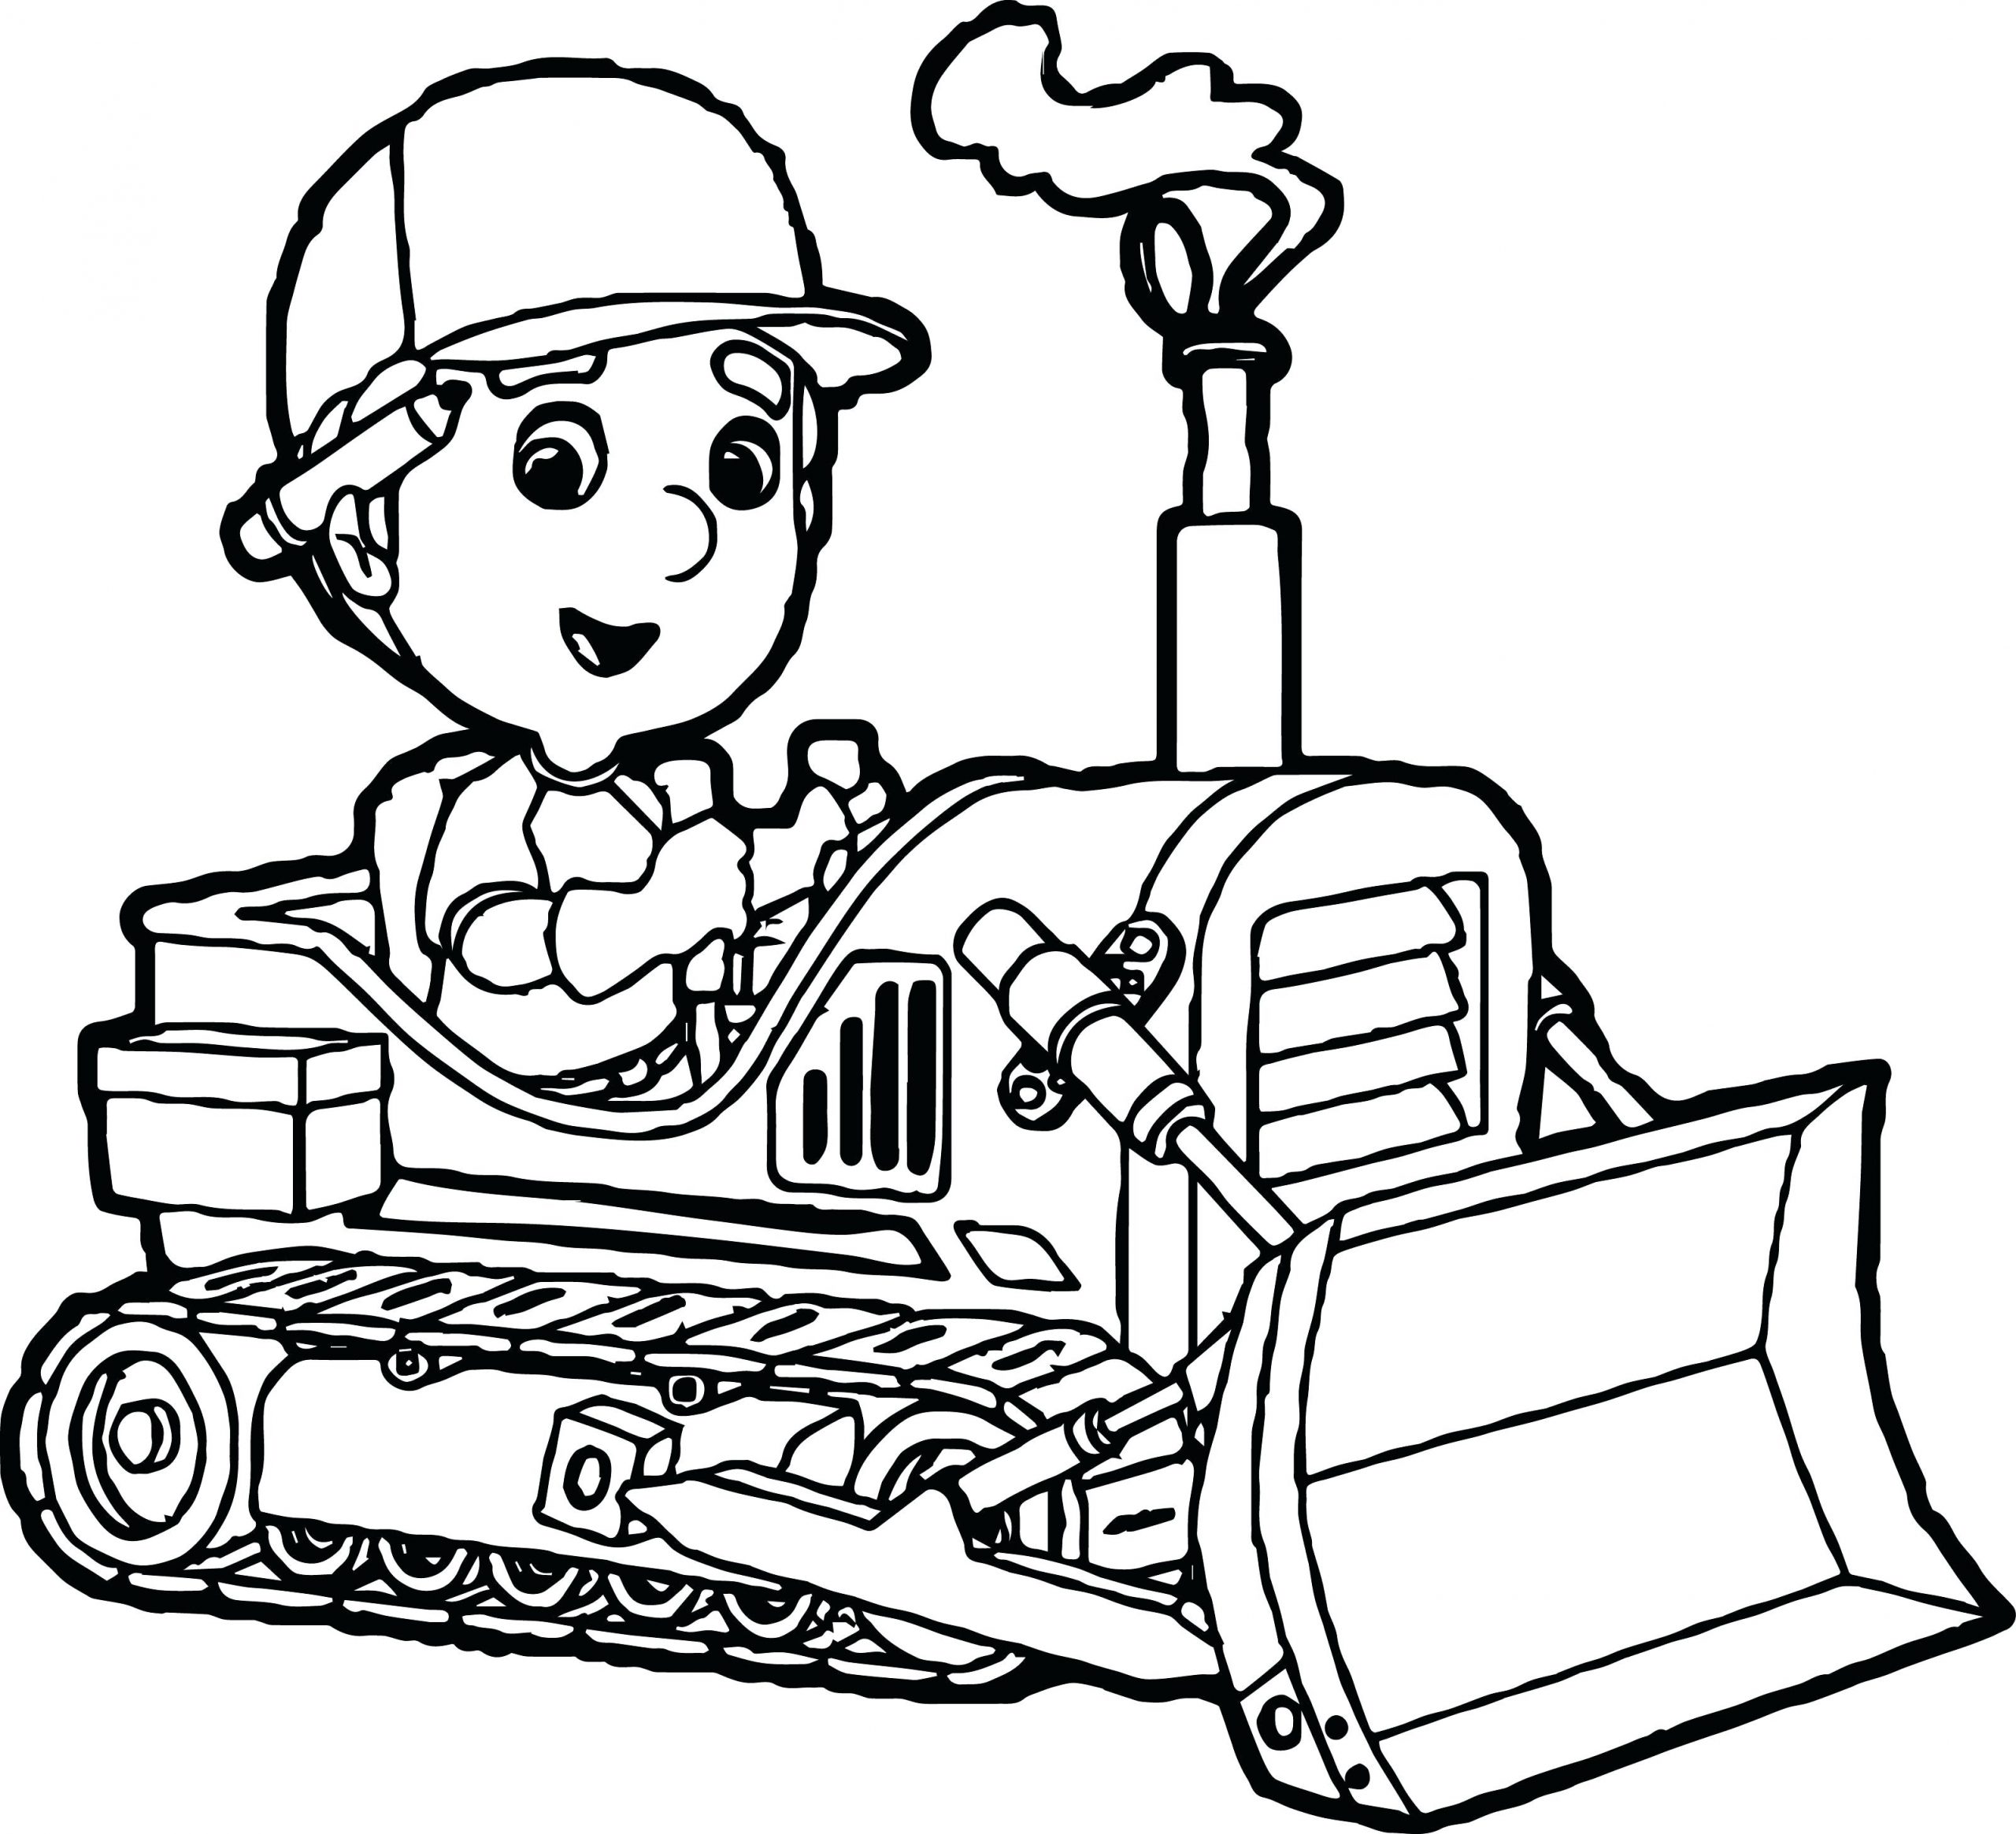 coloring ~ New Coloring Pages Fantastic Backhoe Best Bulldozerde ...